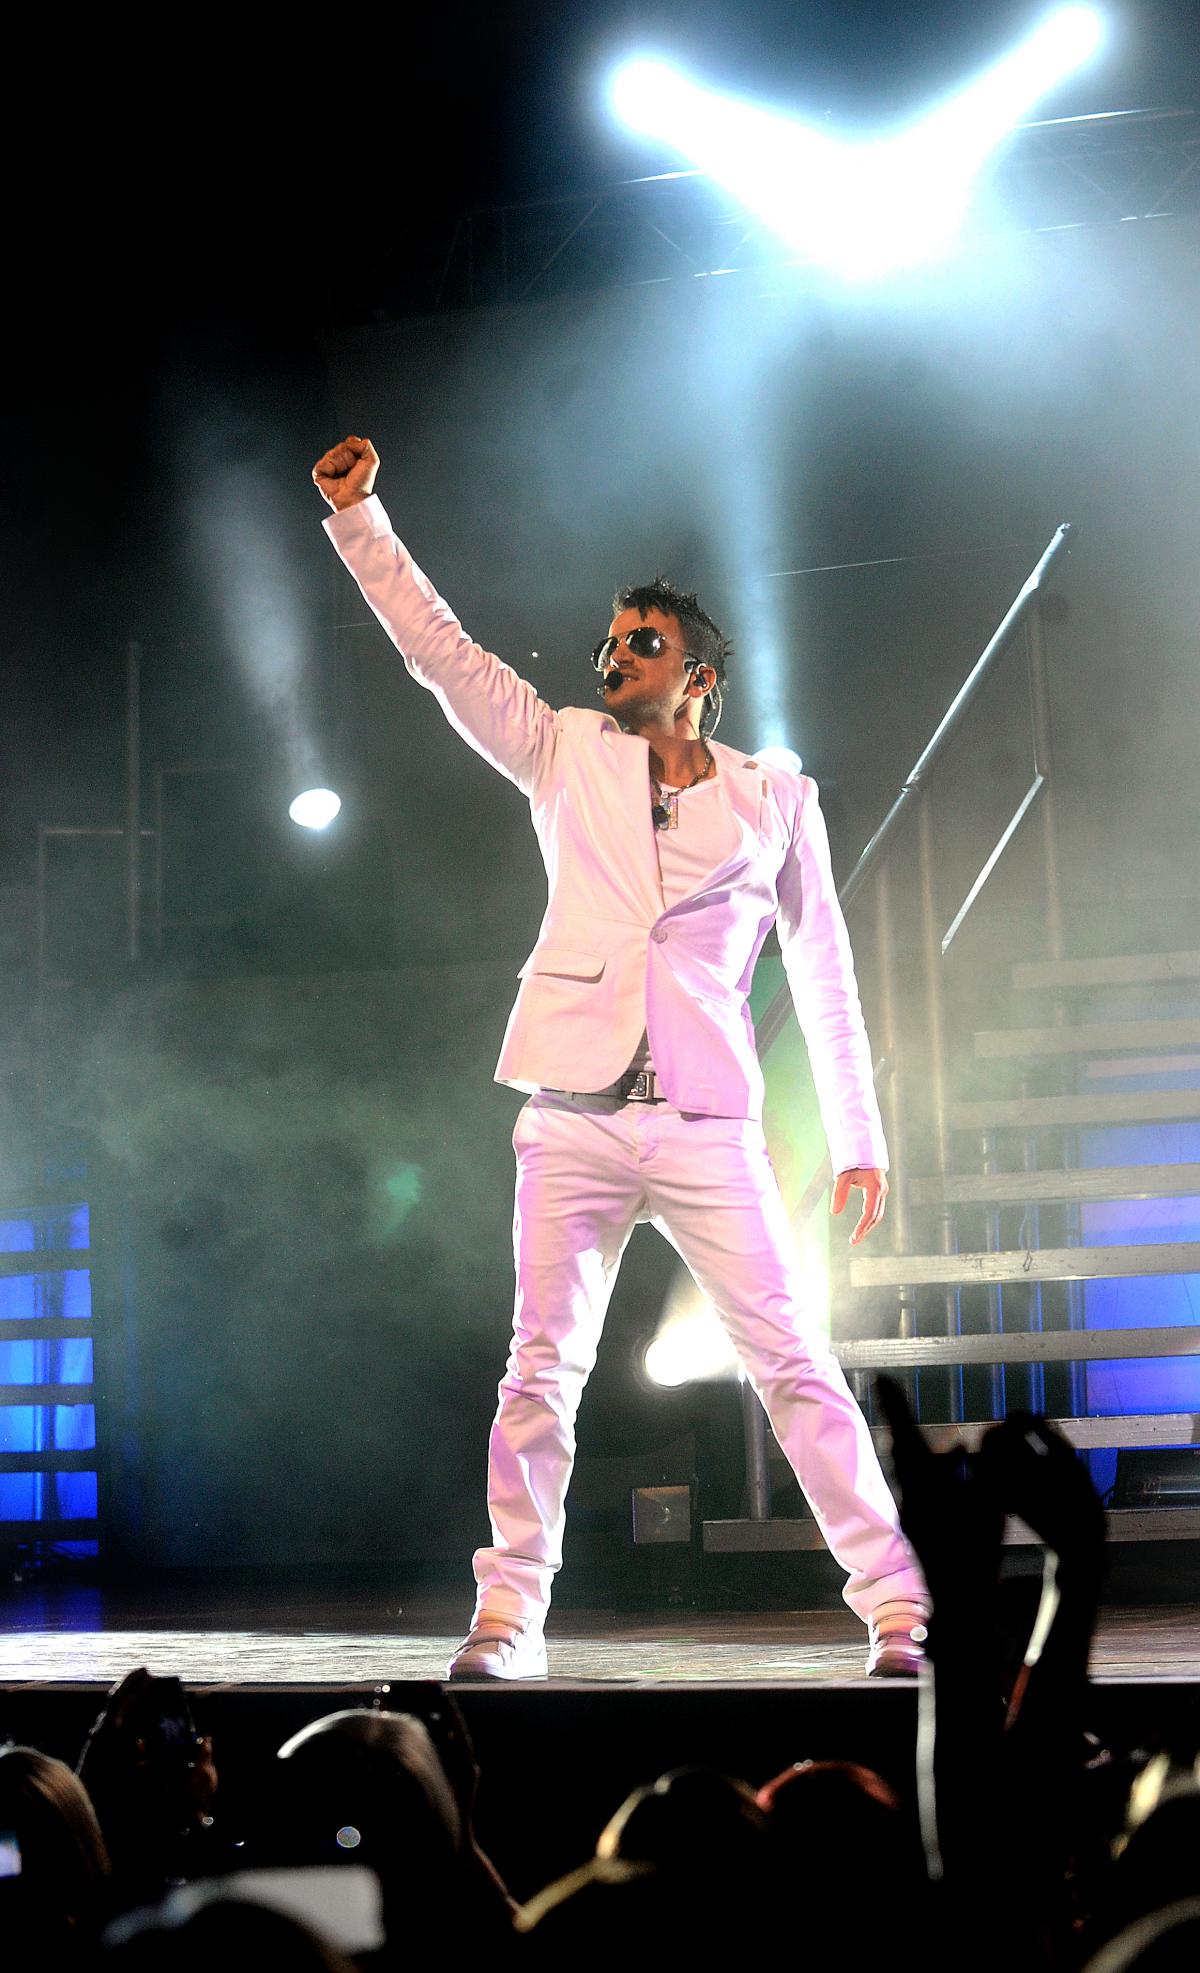 Peter Andre at St George's Hall in 2010